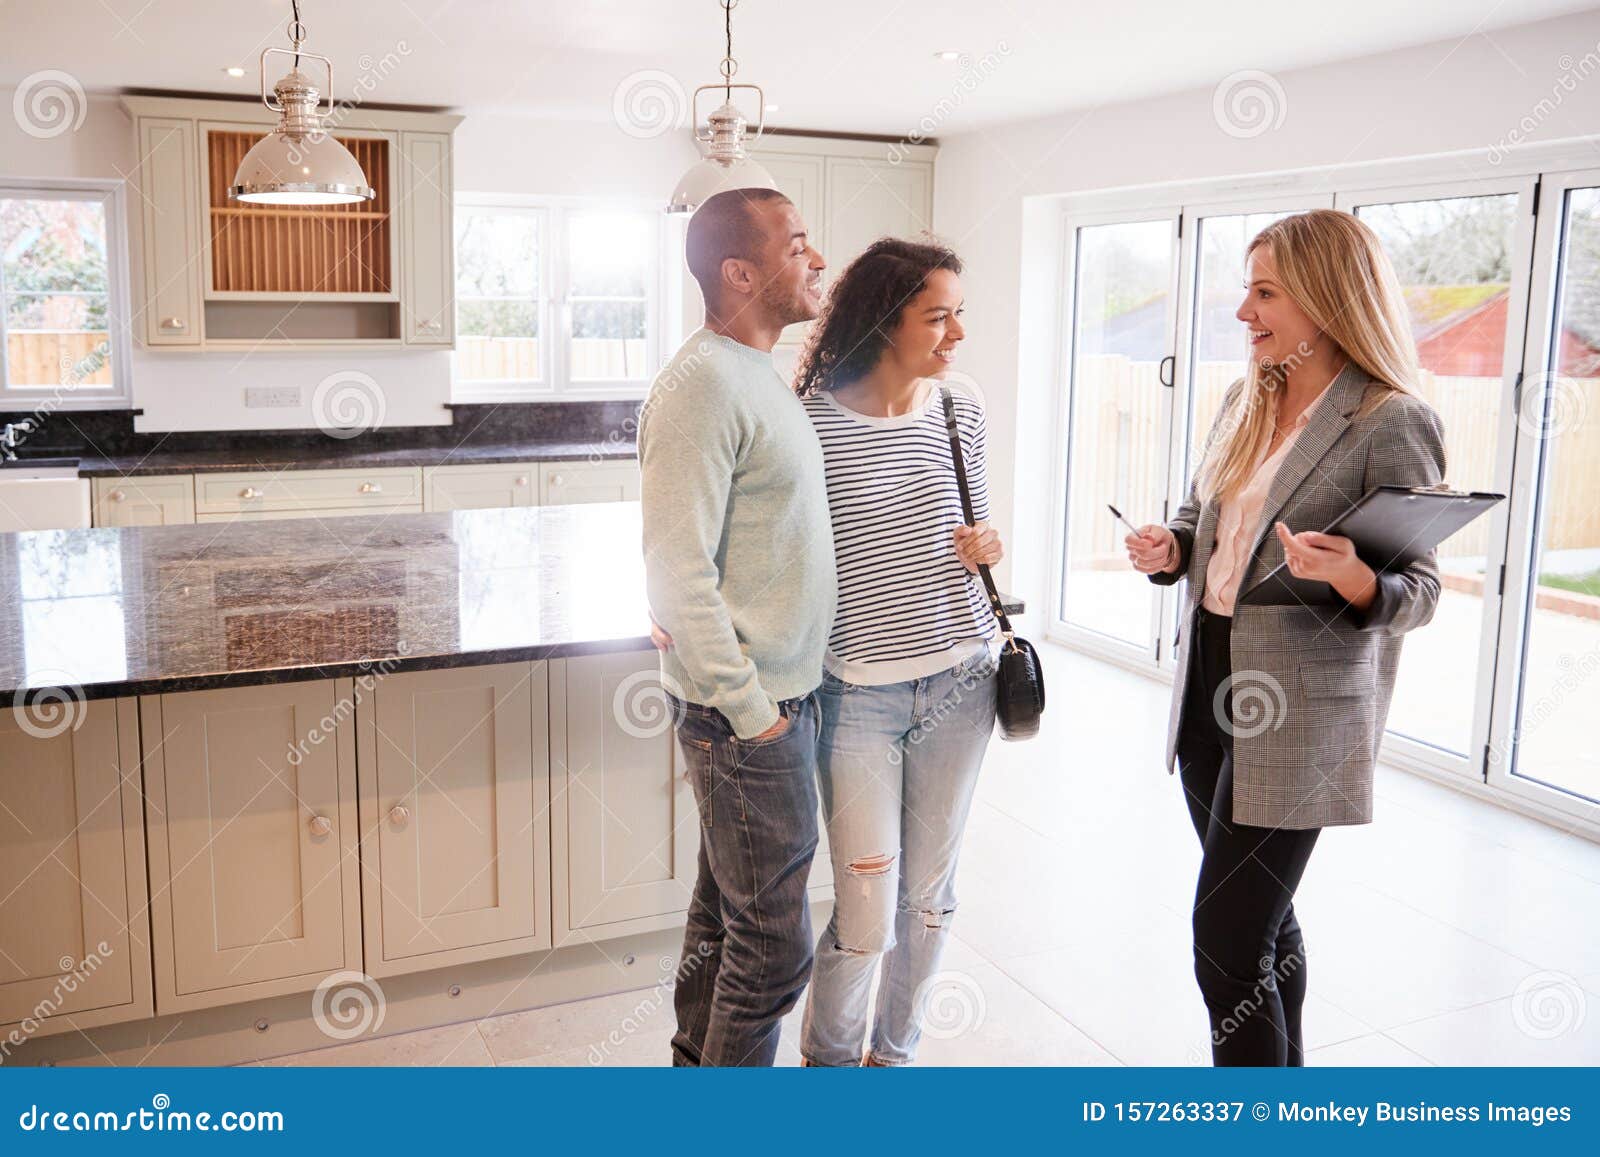 Female Realtor Showing Couple Interested In Buying Around House Stock Image Image Of Person 